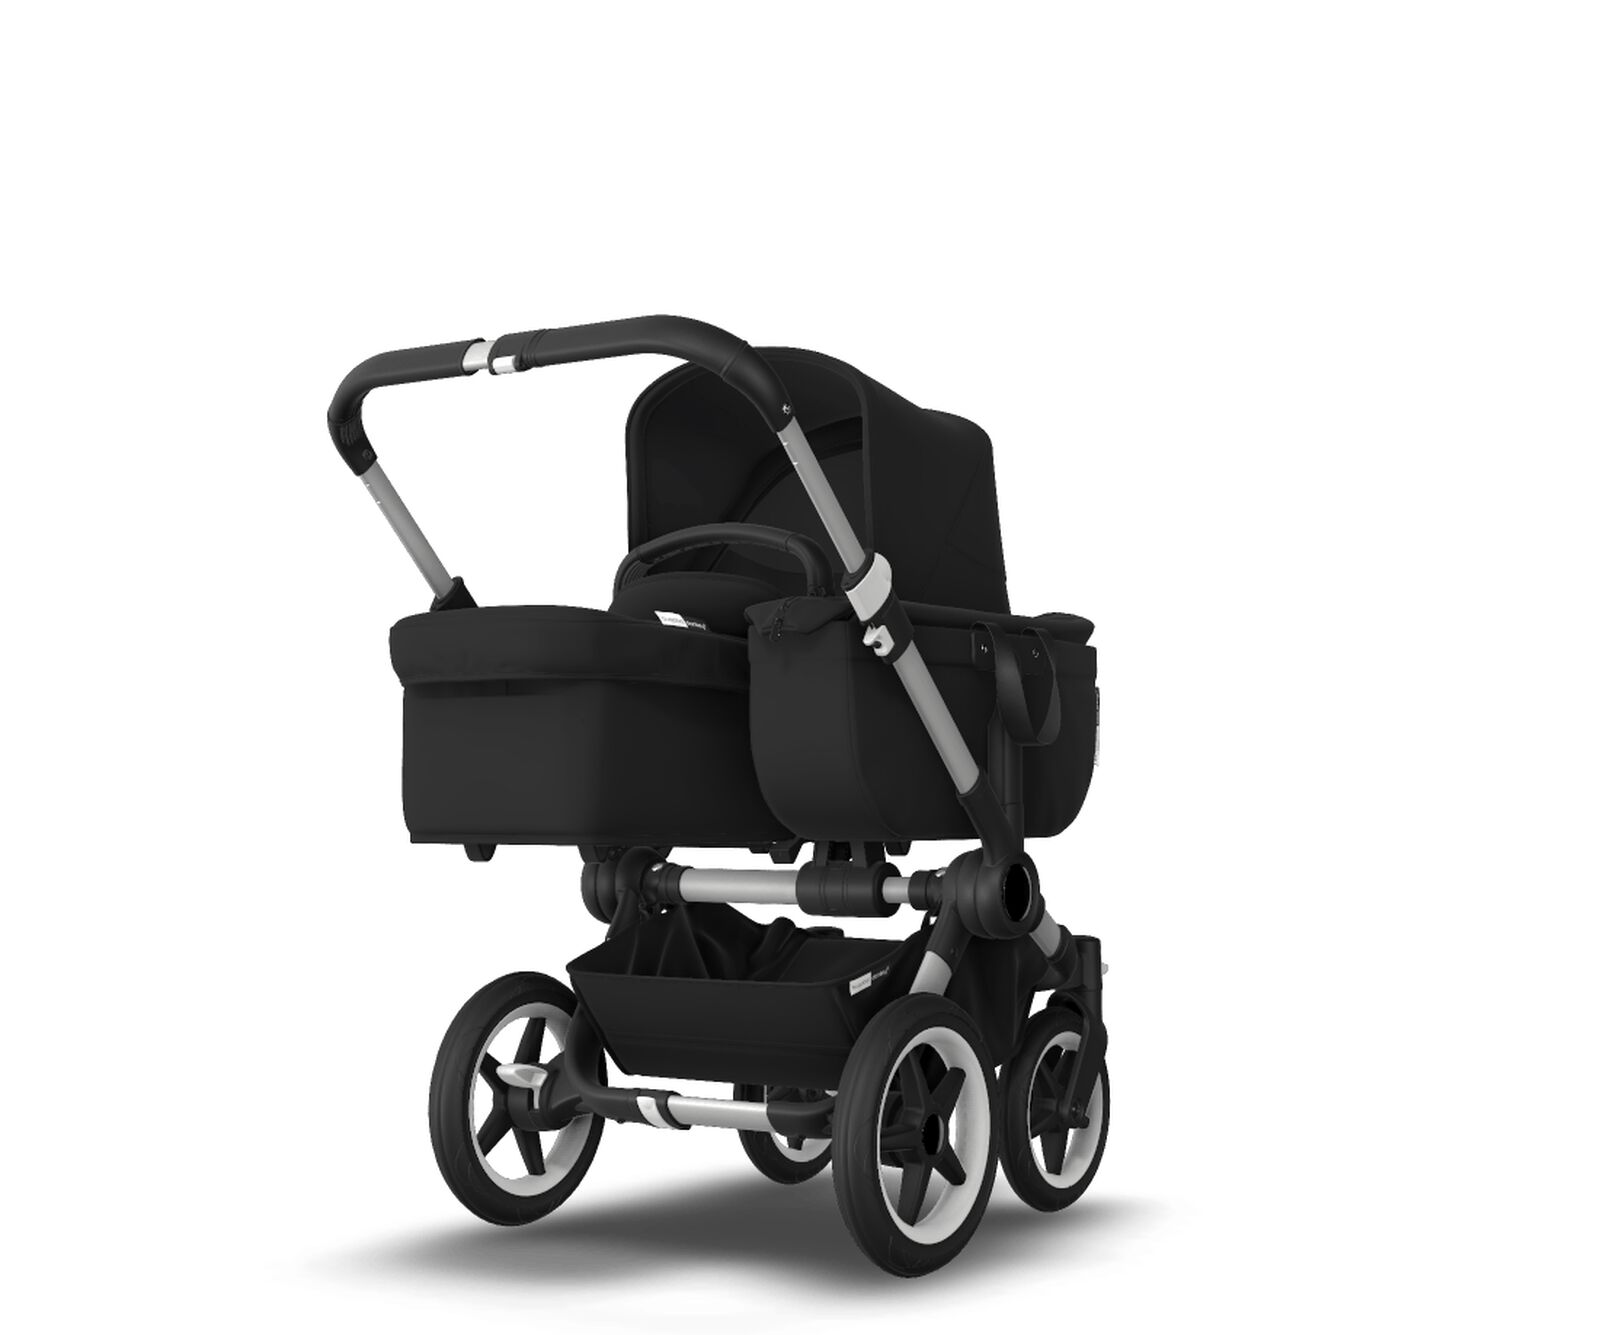 Bugaboo Donkey 3 Mono bassinet and seat stroller - View 1